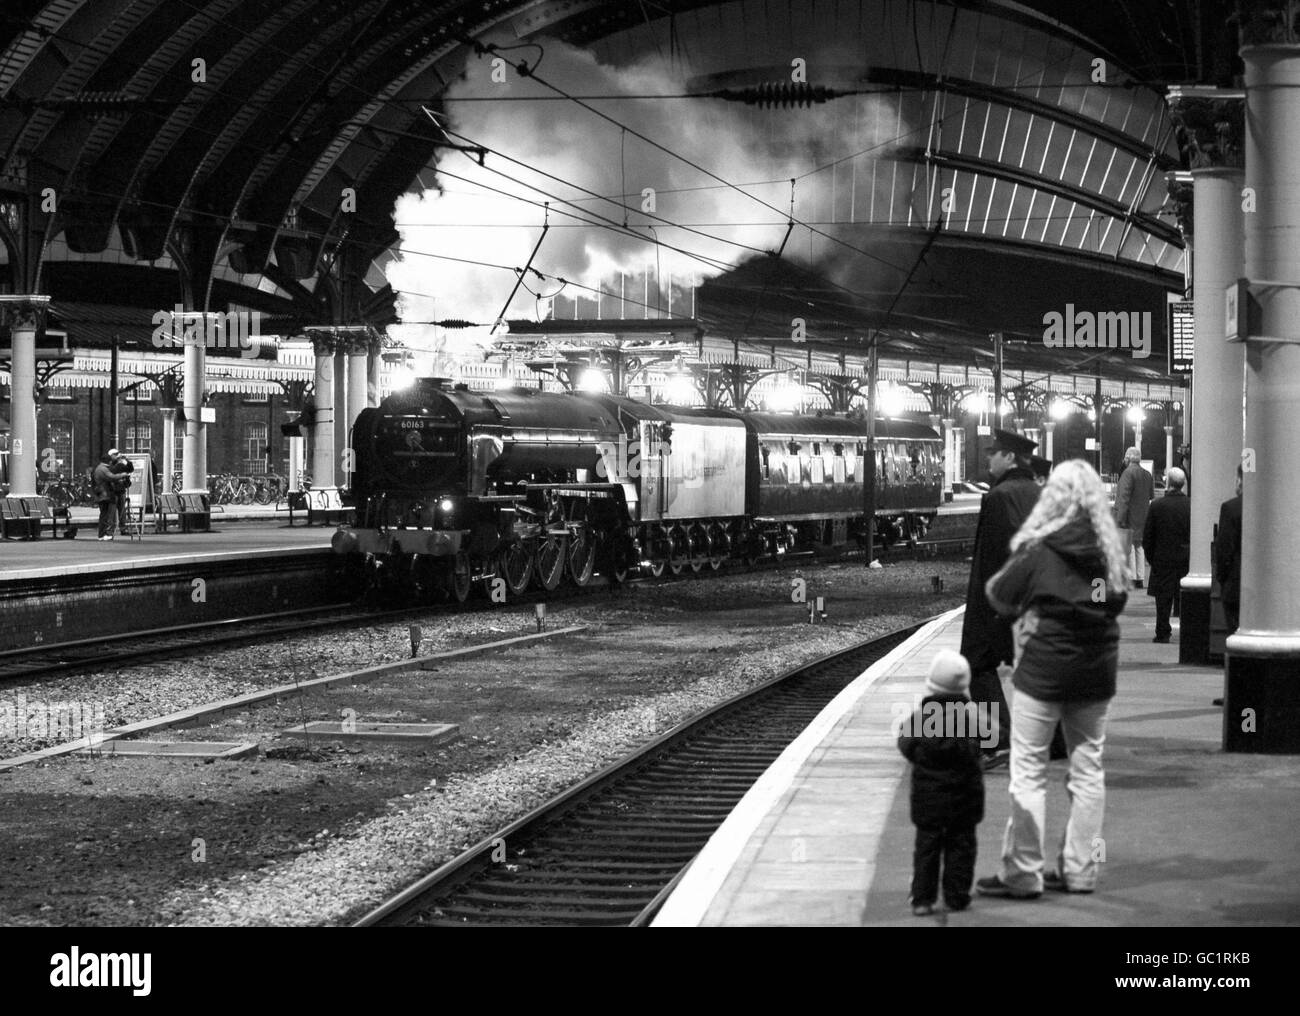 The first new steam train to be built in the UK for almost 50 years, the Tornado Steam Locomotive, pulls out of York Station bound for Scarborough for its first mainline test. Stock Photo